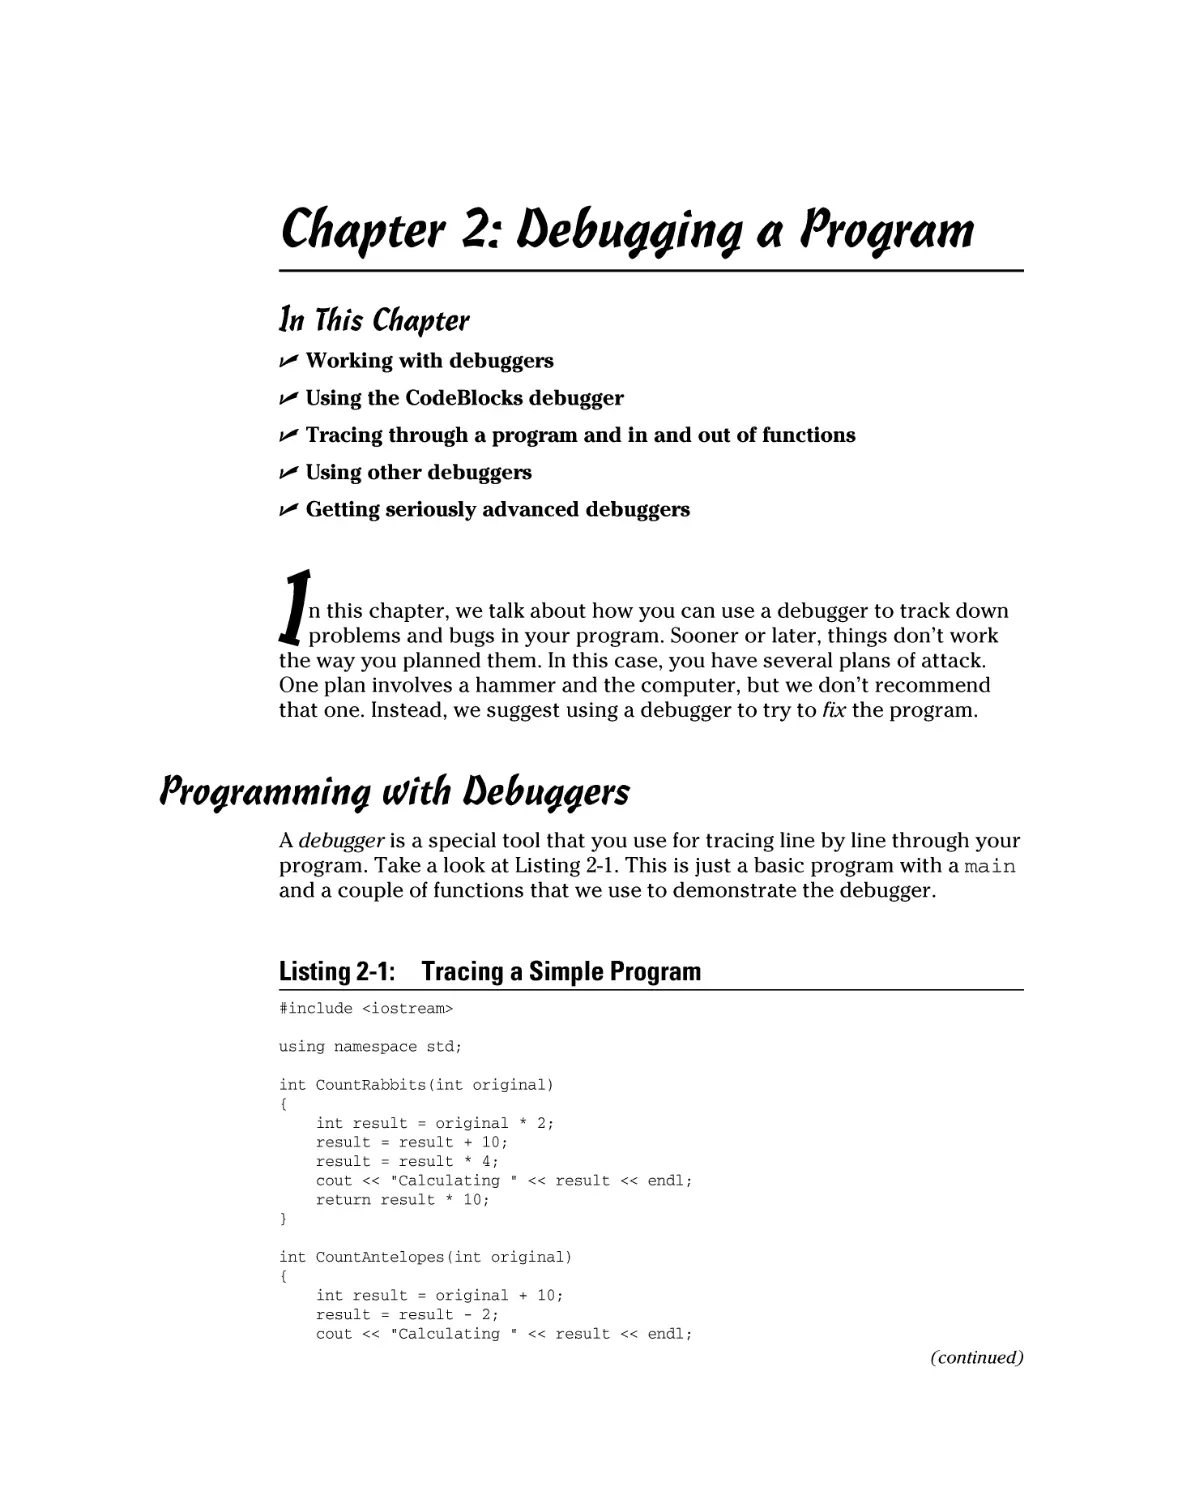 Chapter 2
Programming with Debuggers